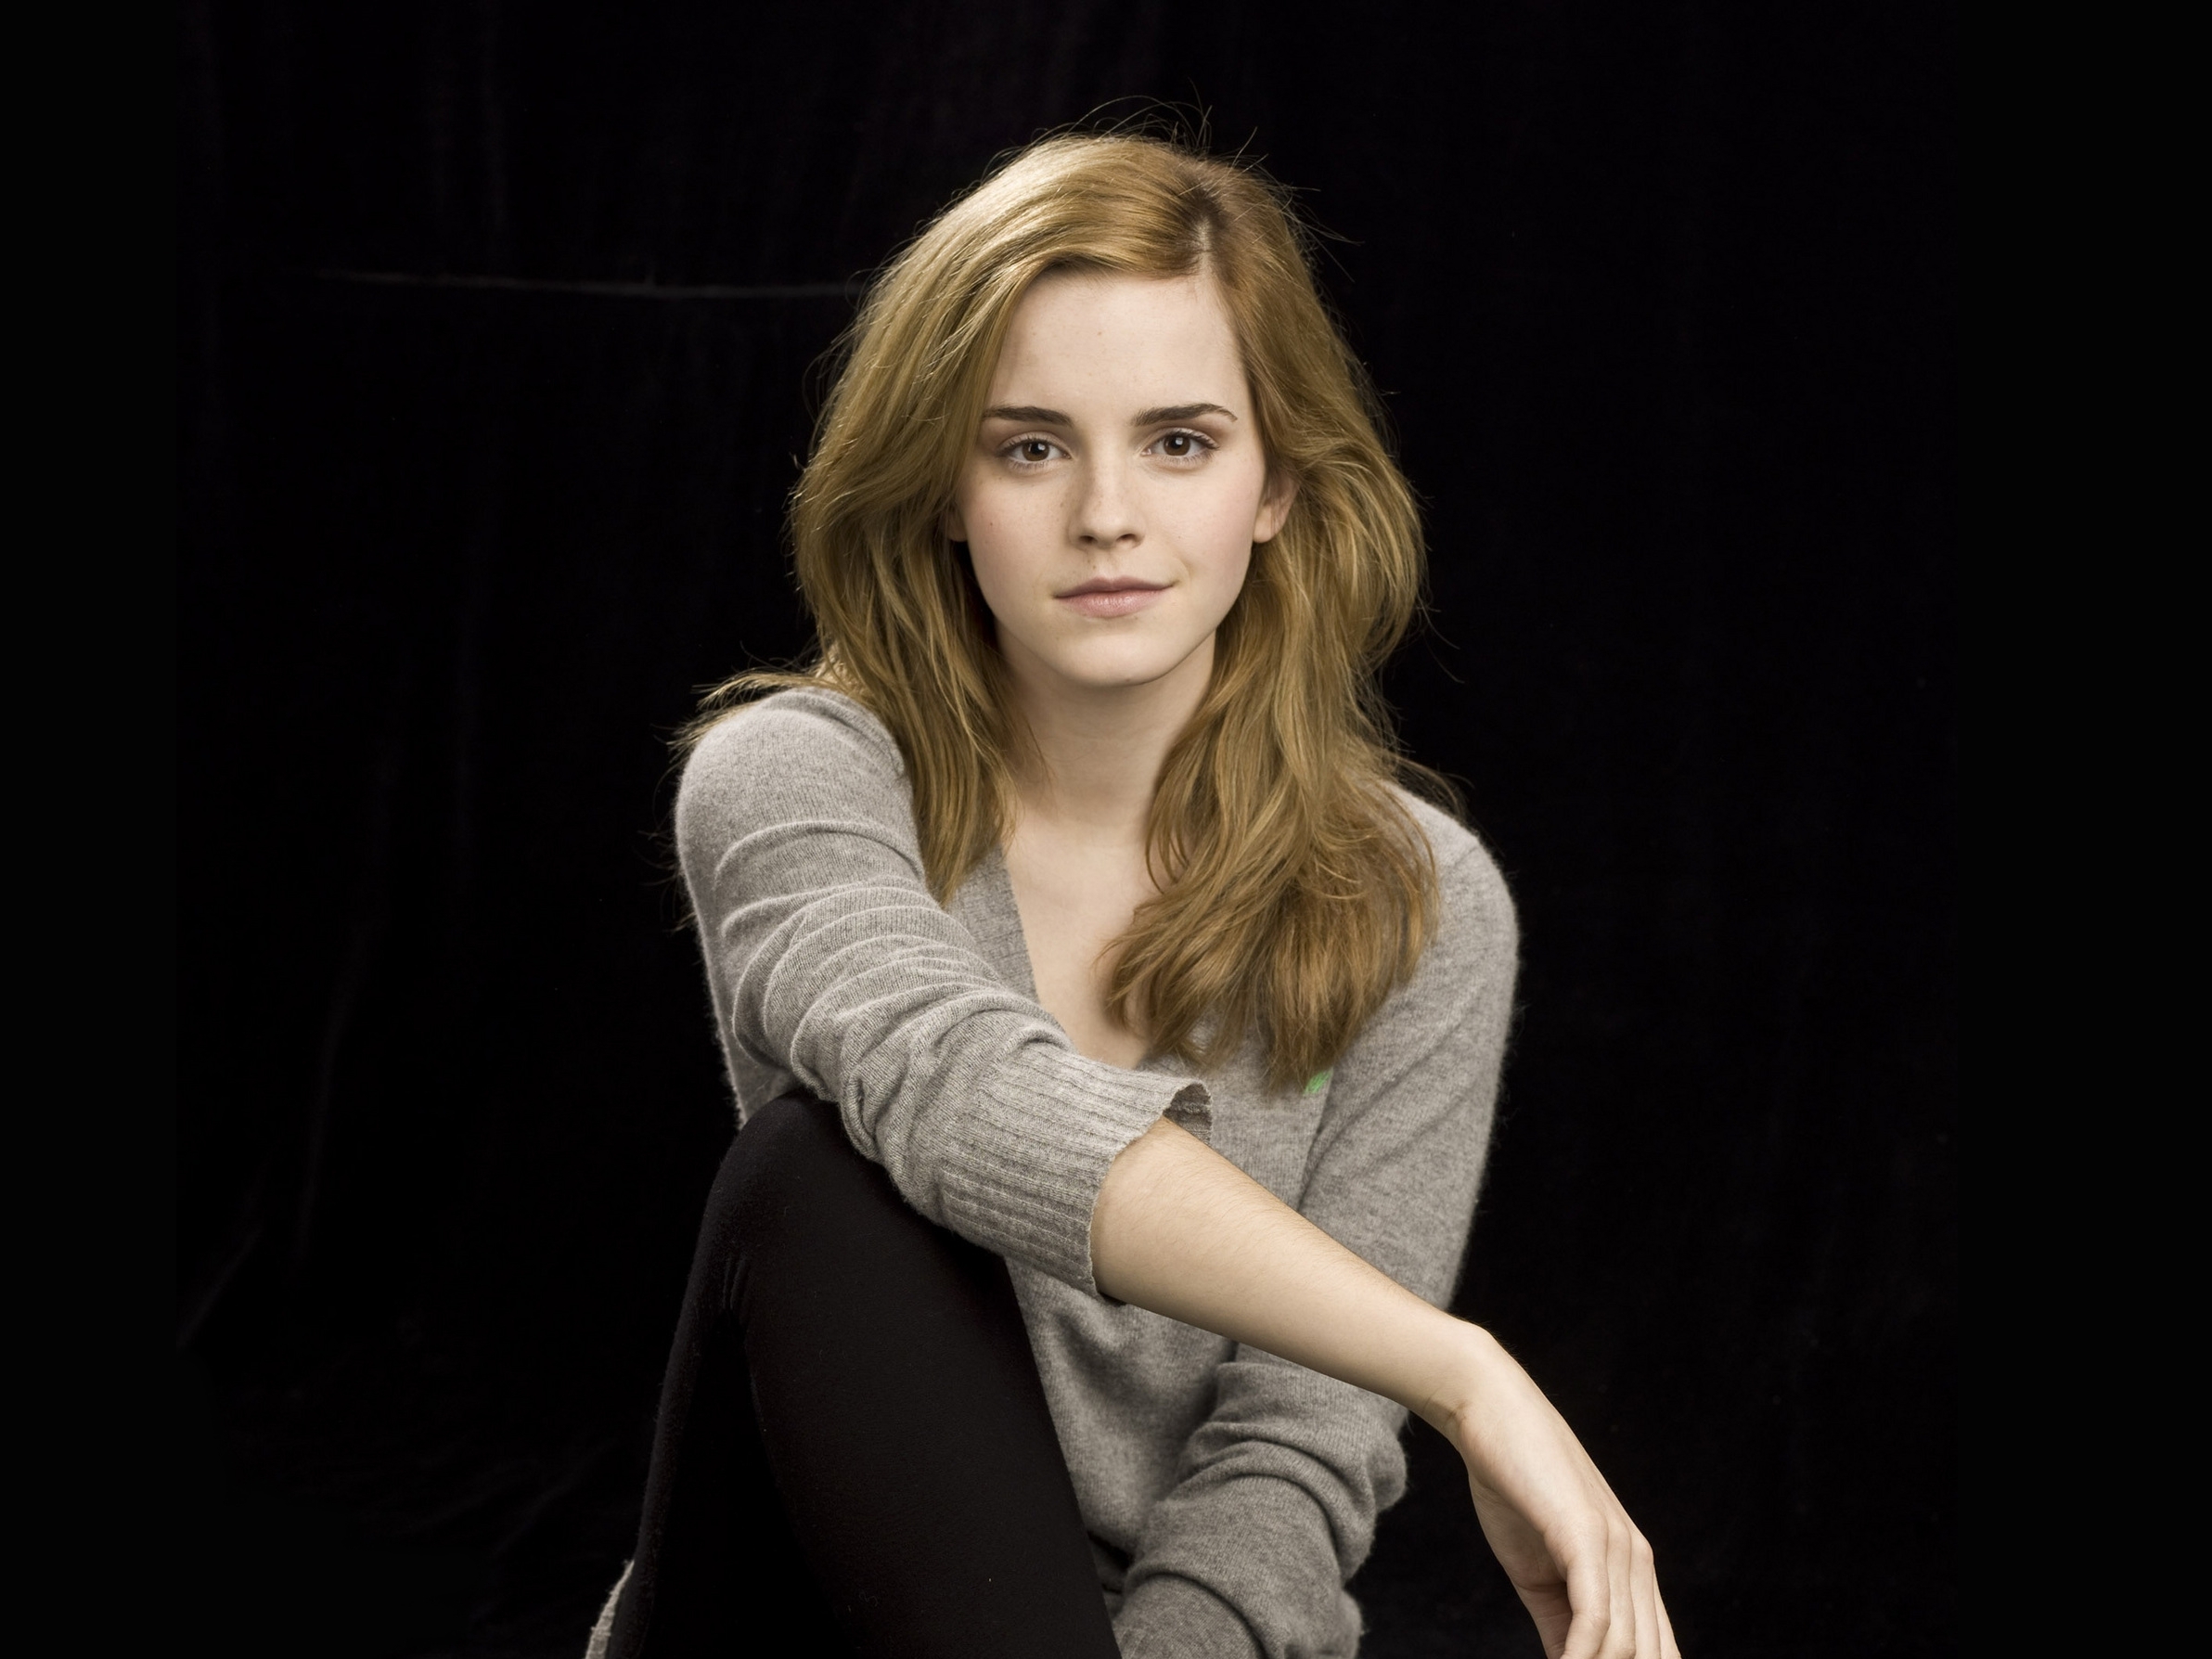 602 emma watson hd wallpapers | background images - wallpaper abyss